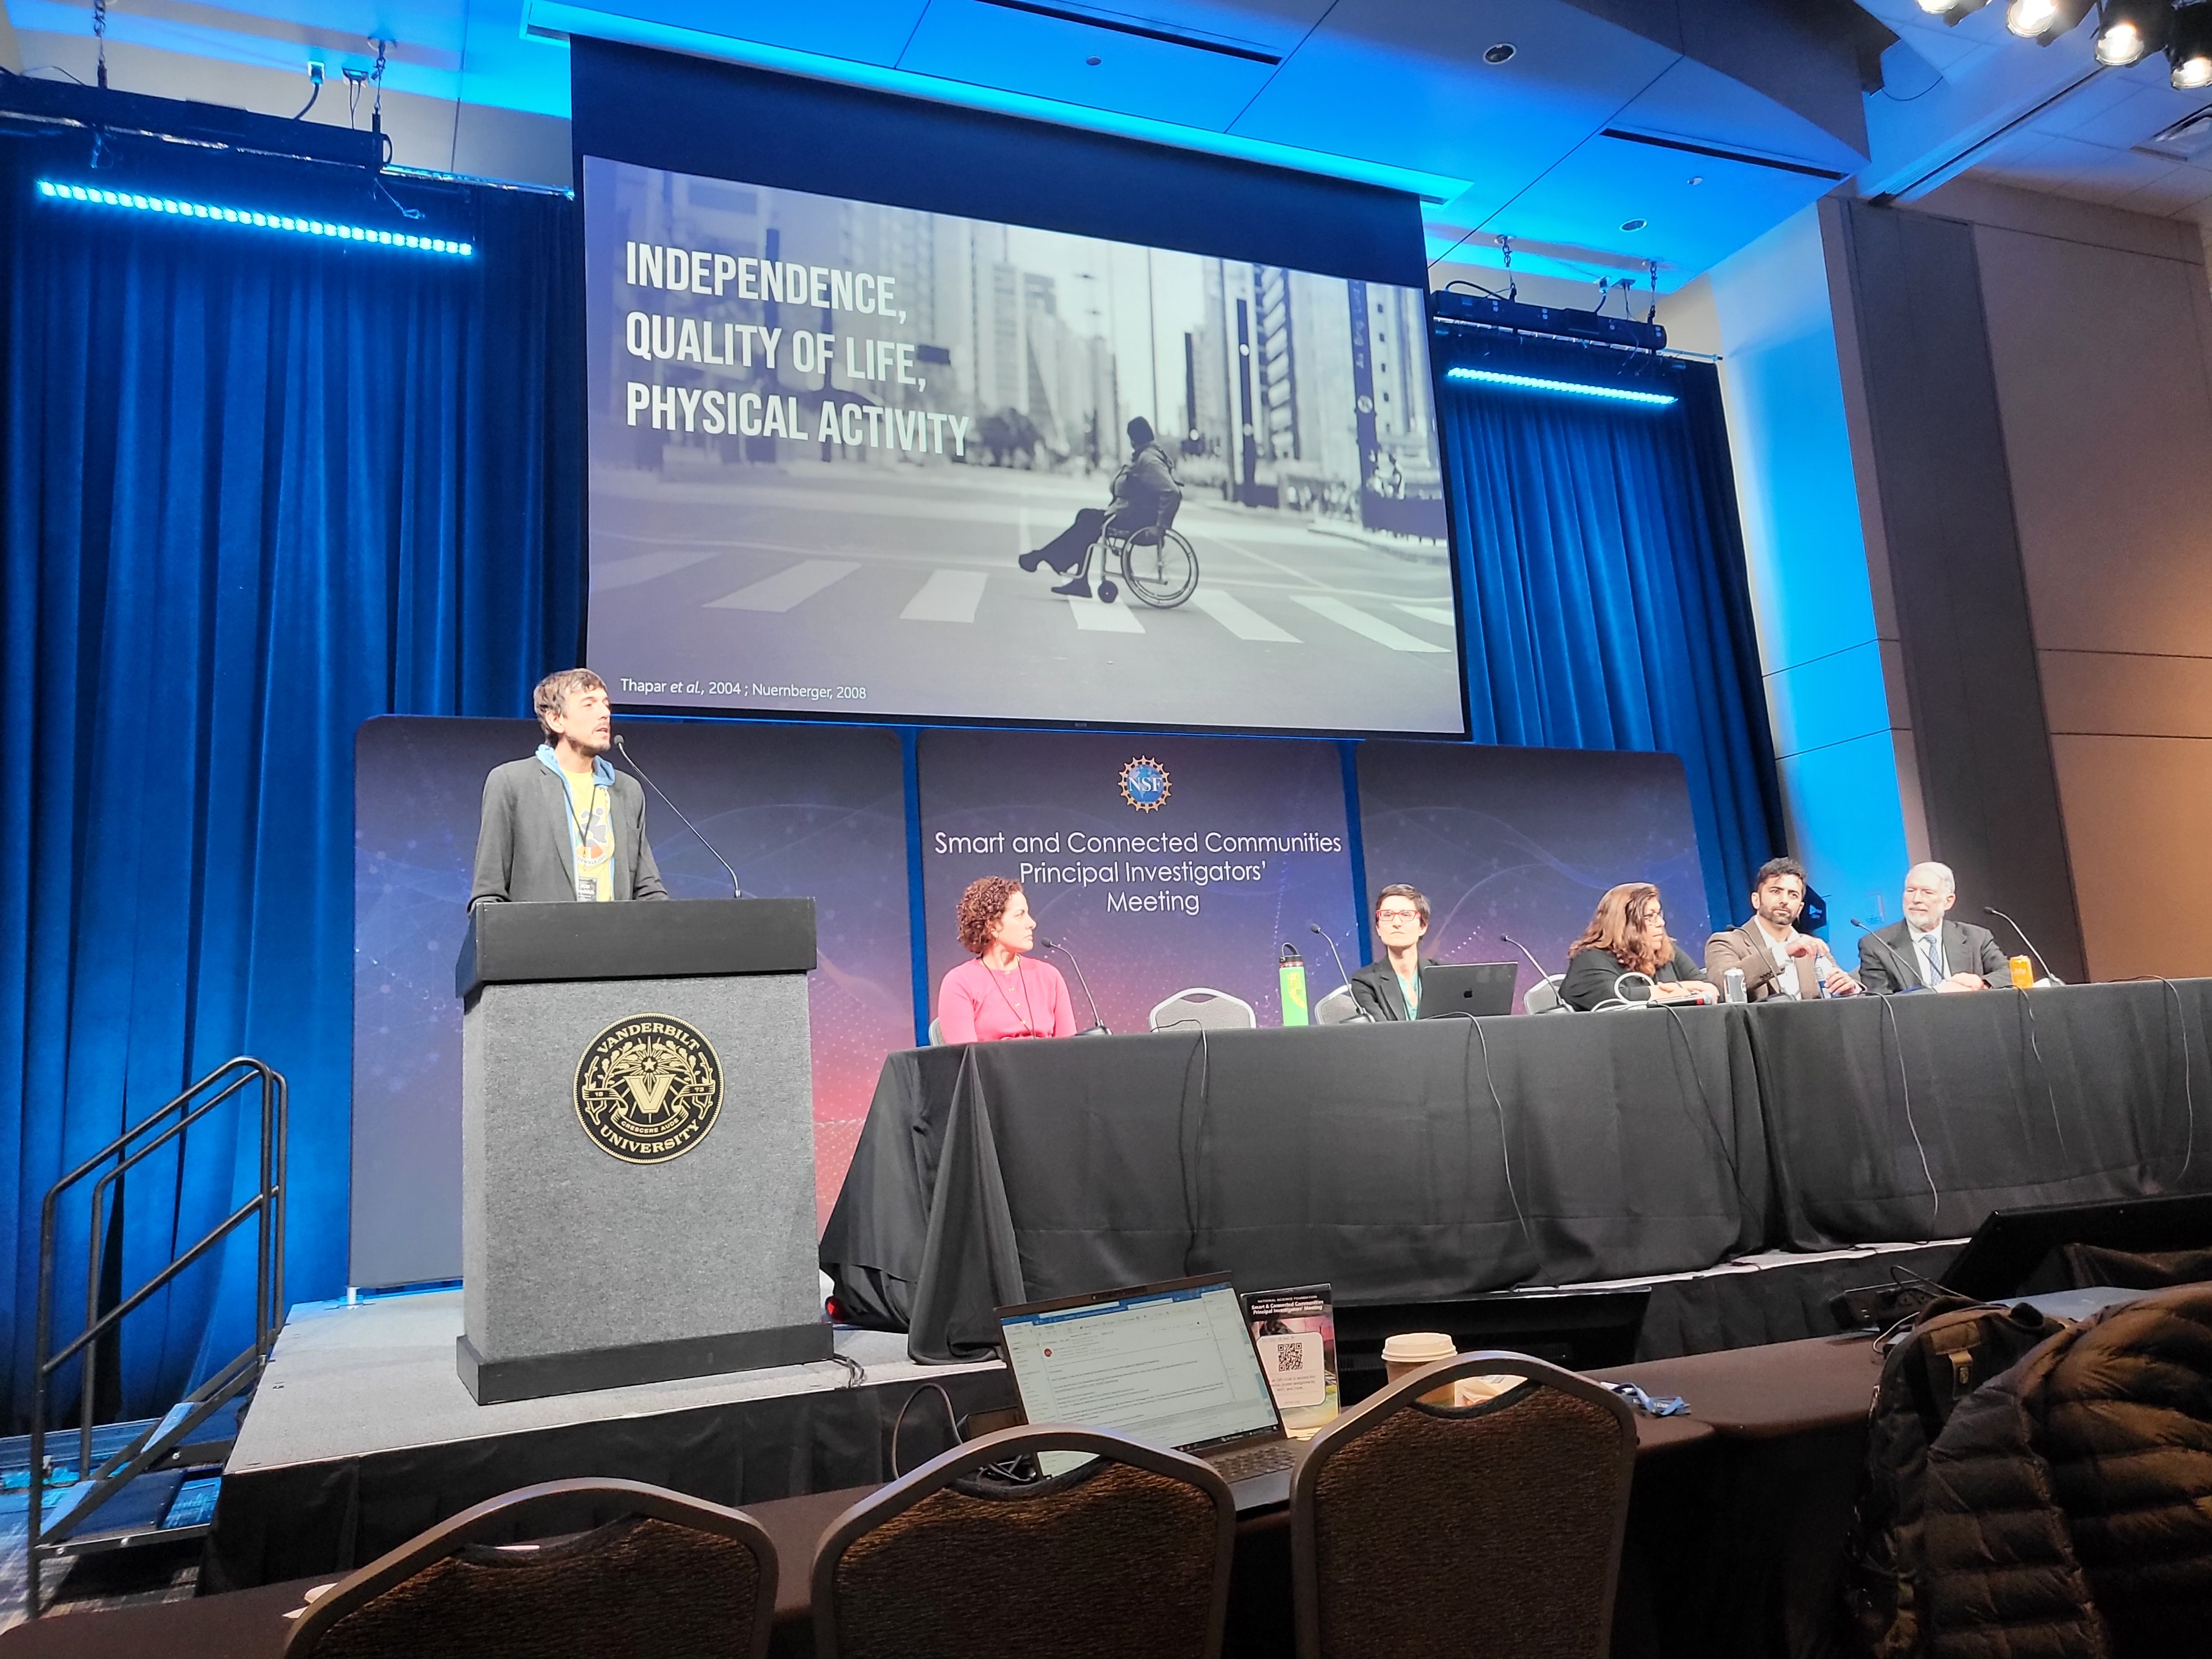 Jon standing on stage at NSF SCC giving presentation